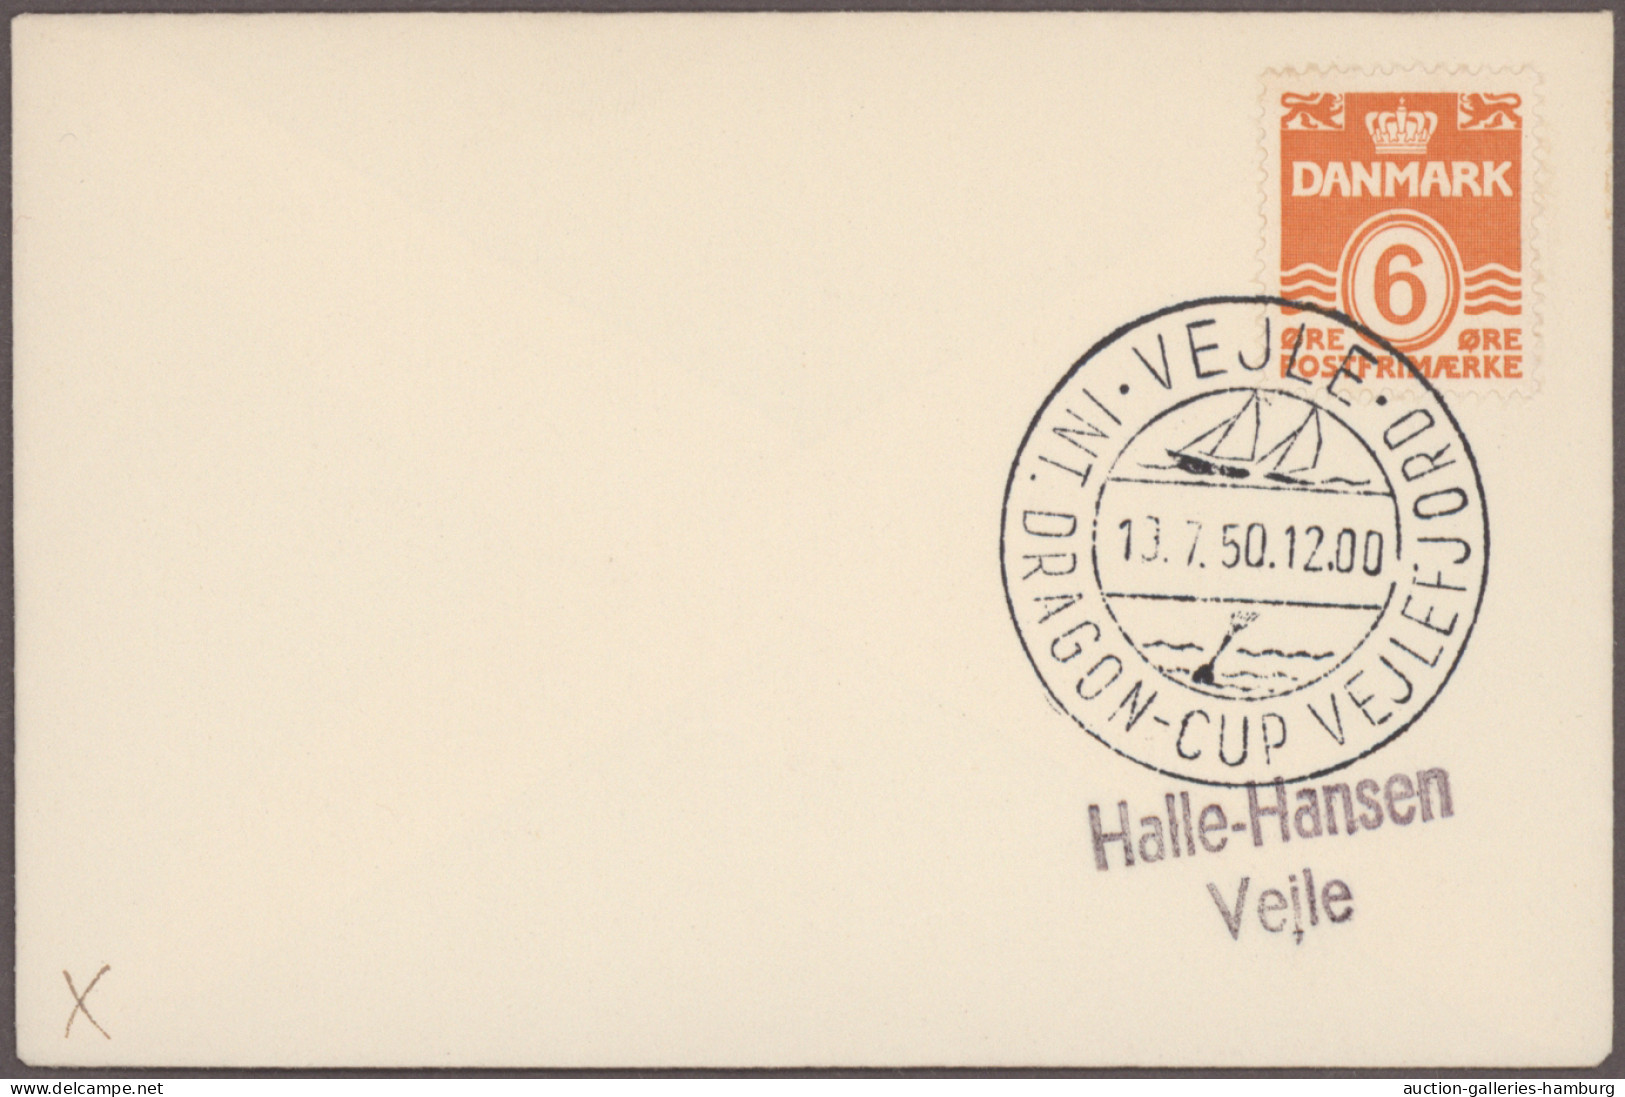 Denmark - post marks: 1947/1993, SPECIAL EVENT POSTMARKS, holding of apprx. 560